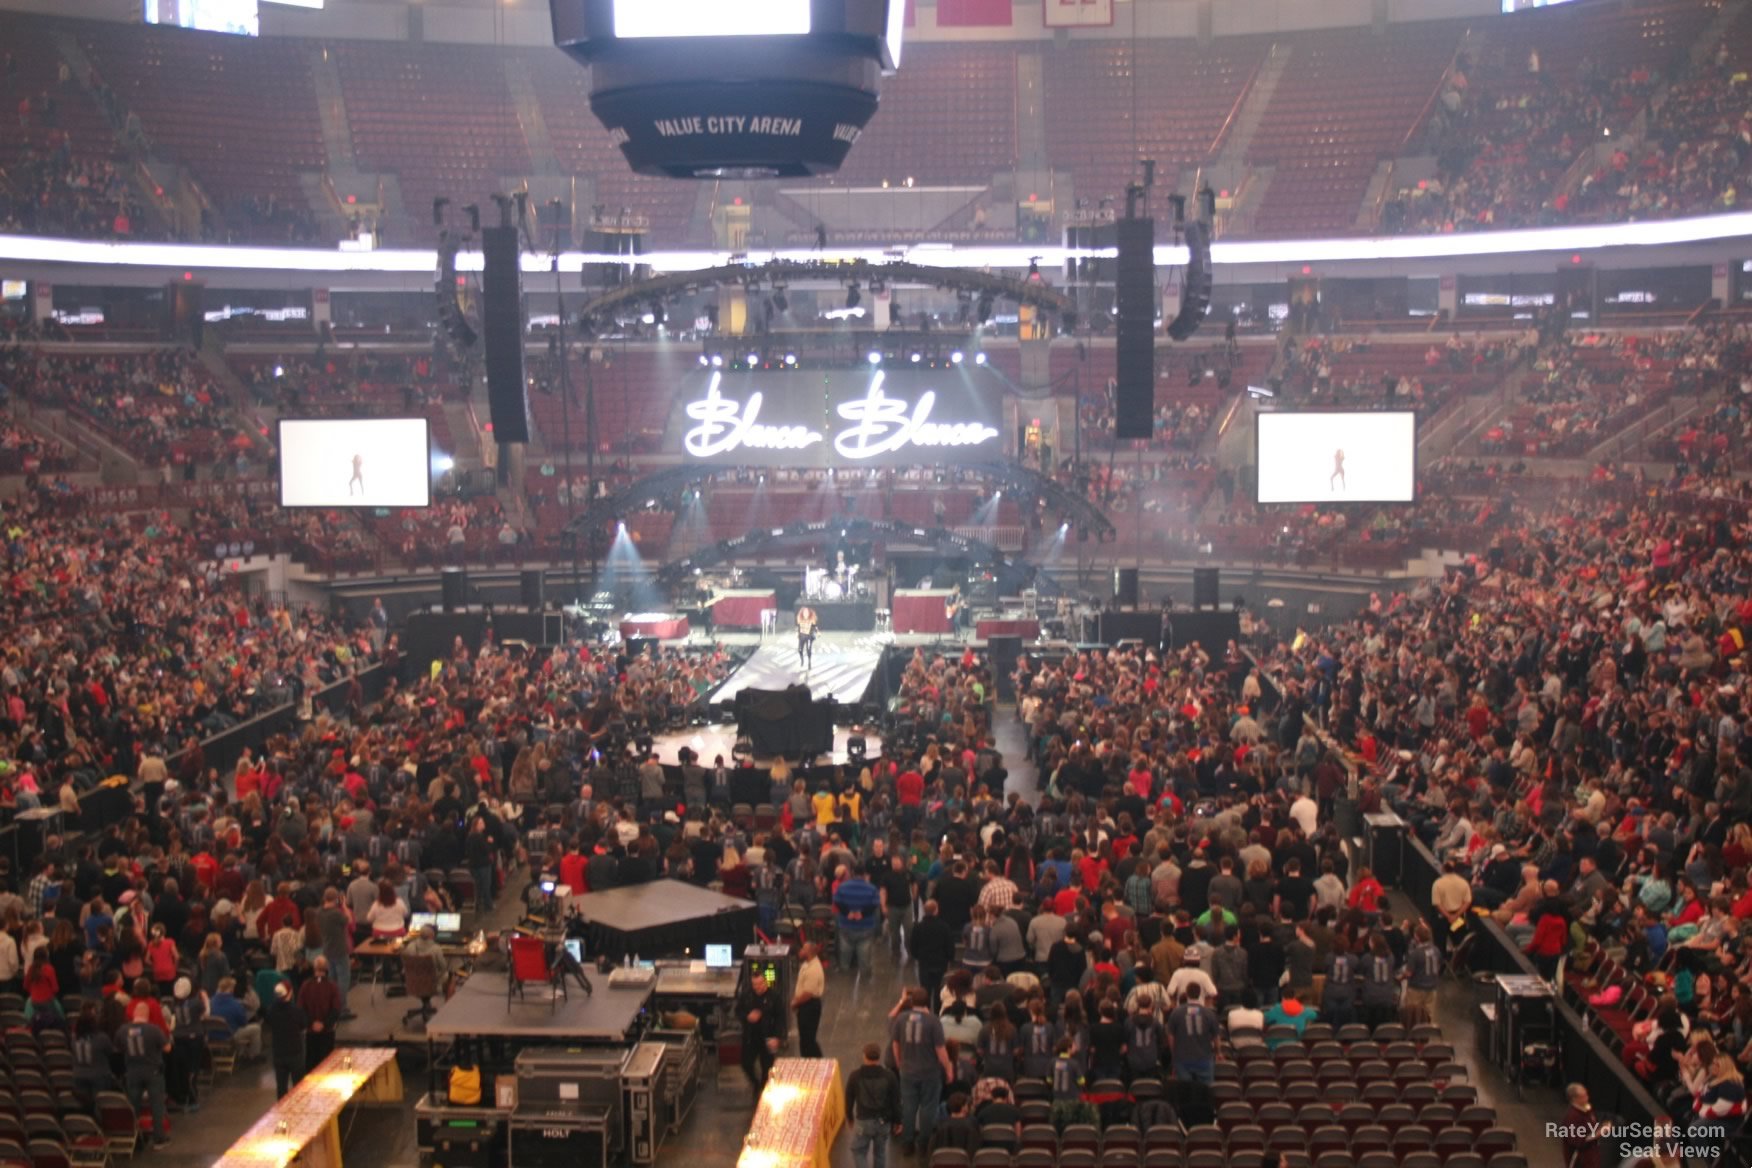 section 230, row d seat view  for concert - schottenstein center